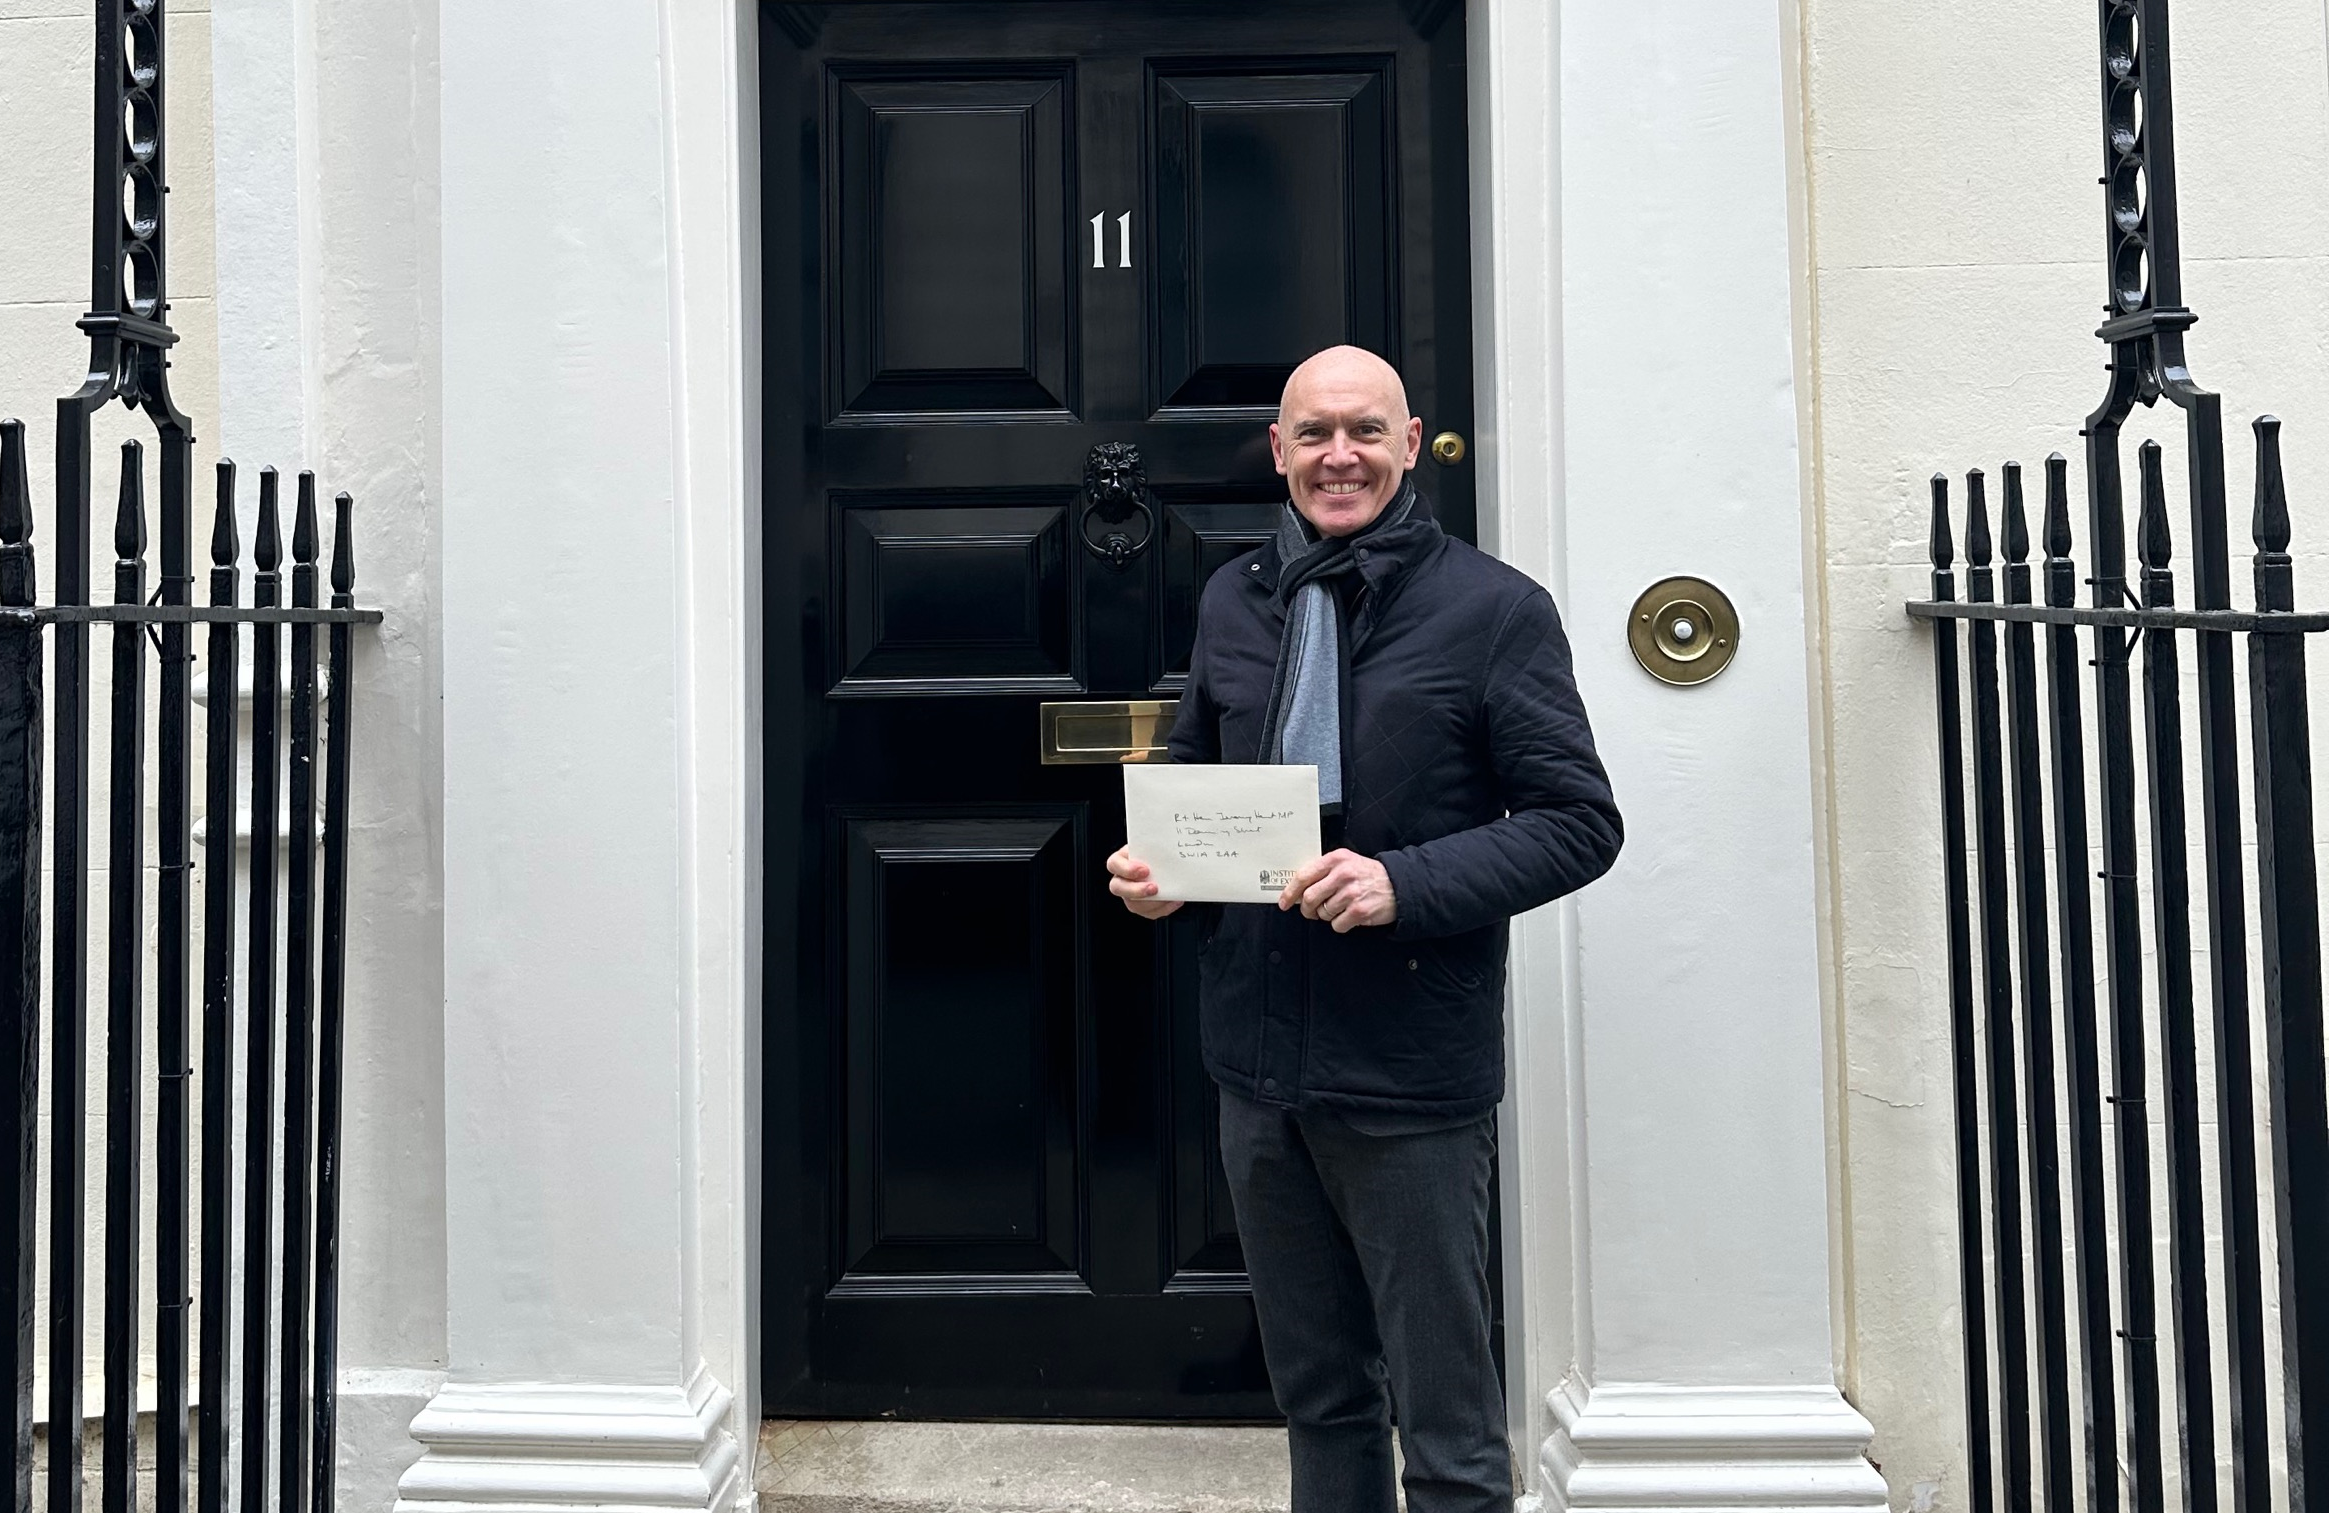 Marco Forgione at no 11 Downing Street handing over a letter